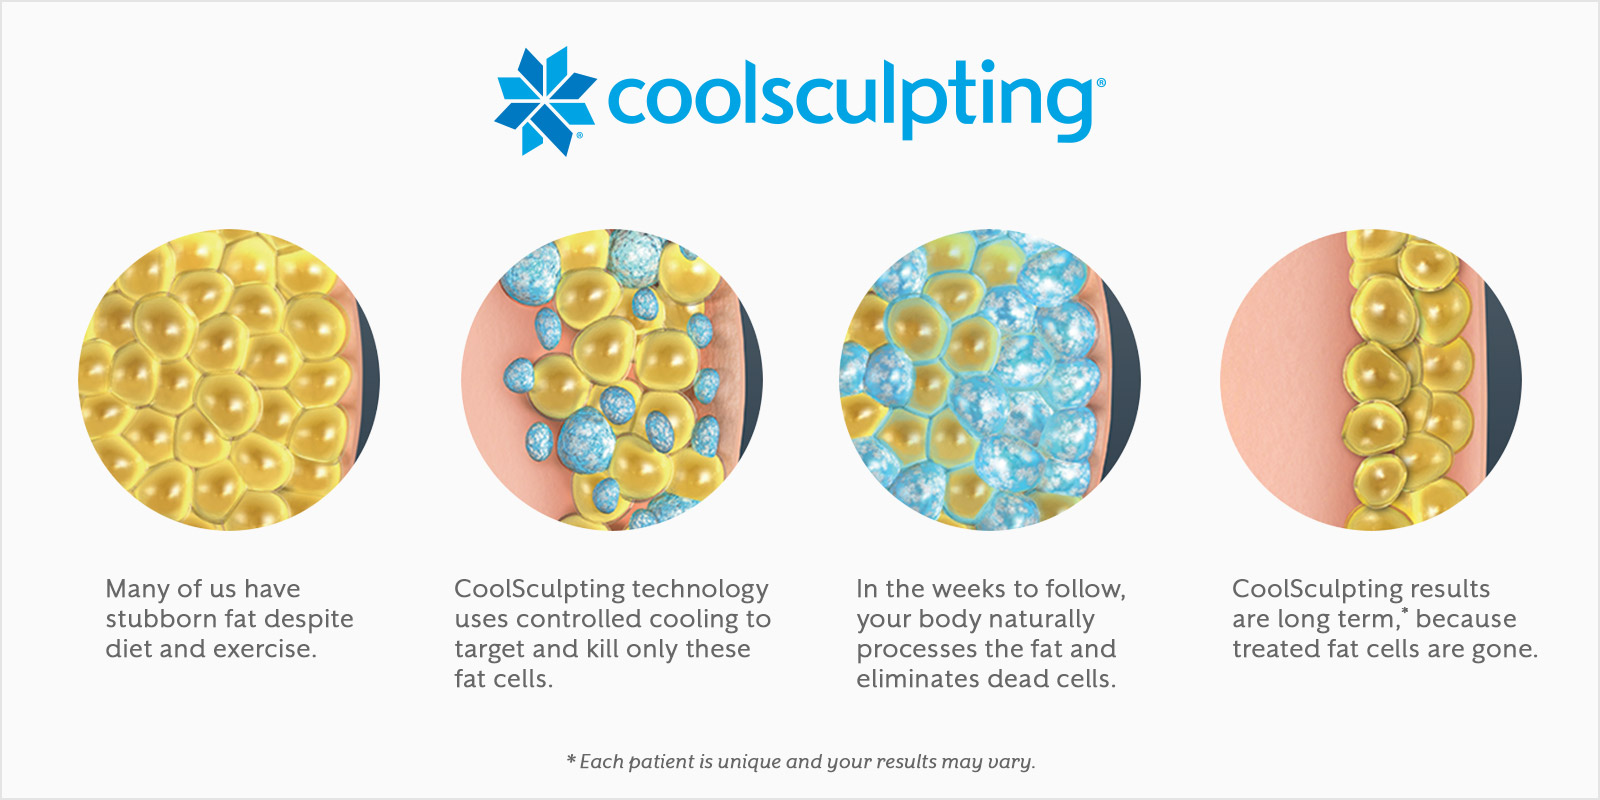 An illustration of fat cells and how they respond to CoolSculpting's cryolipolysis